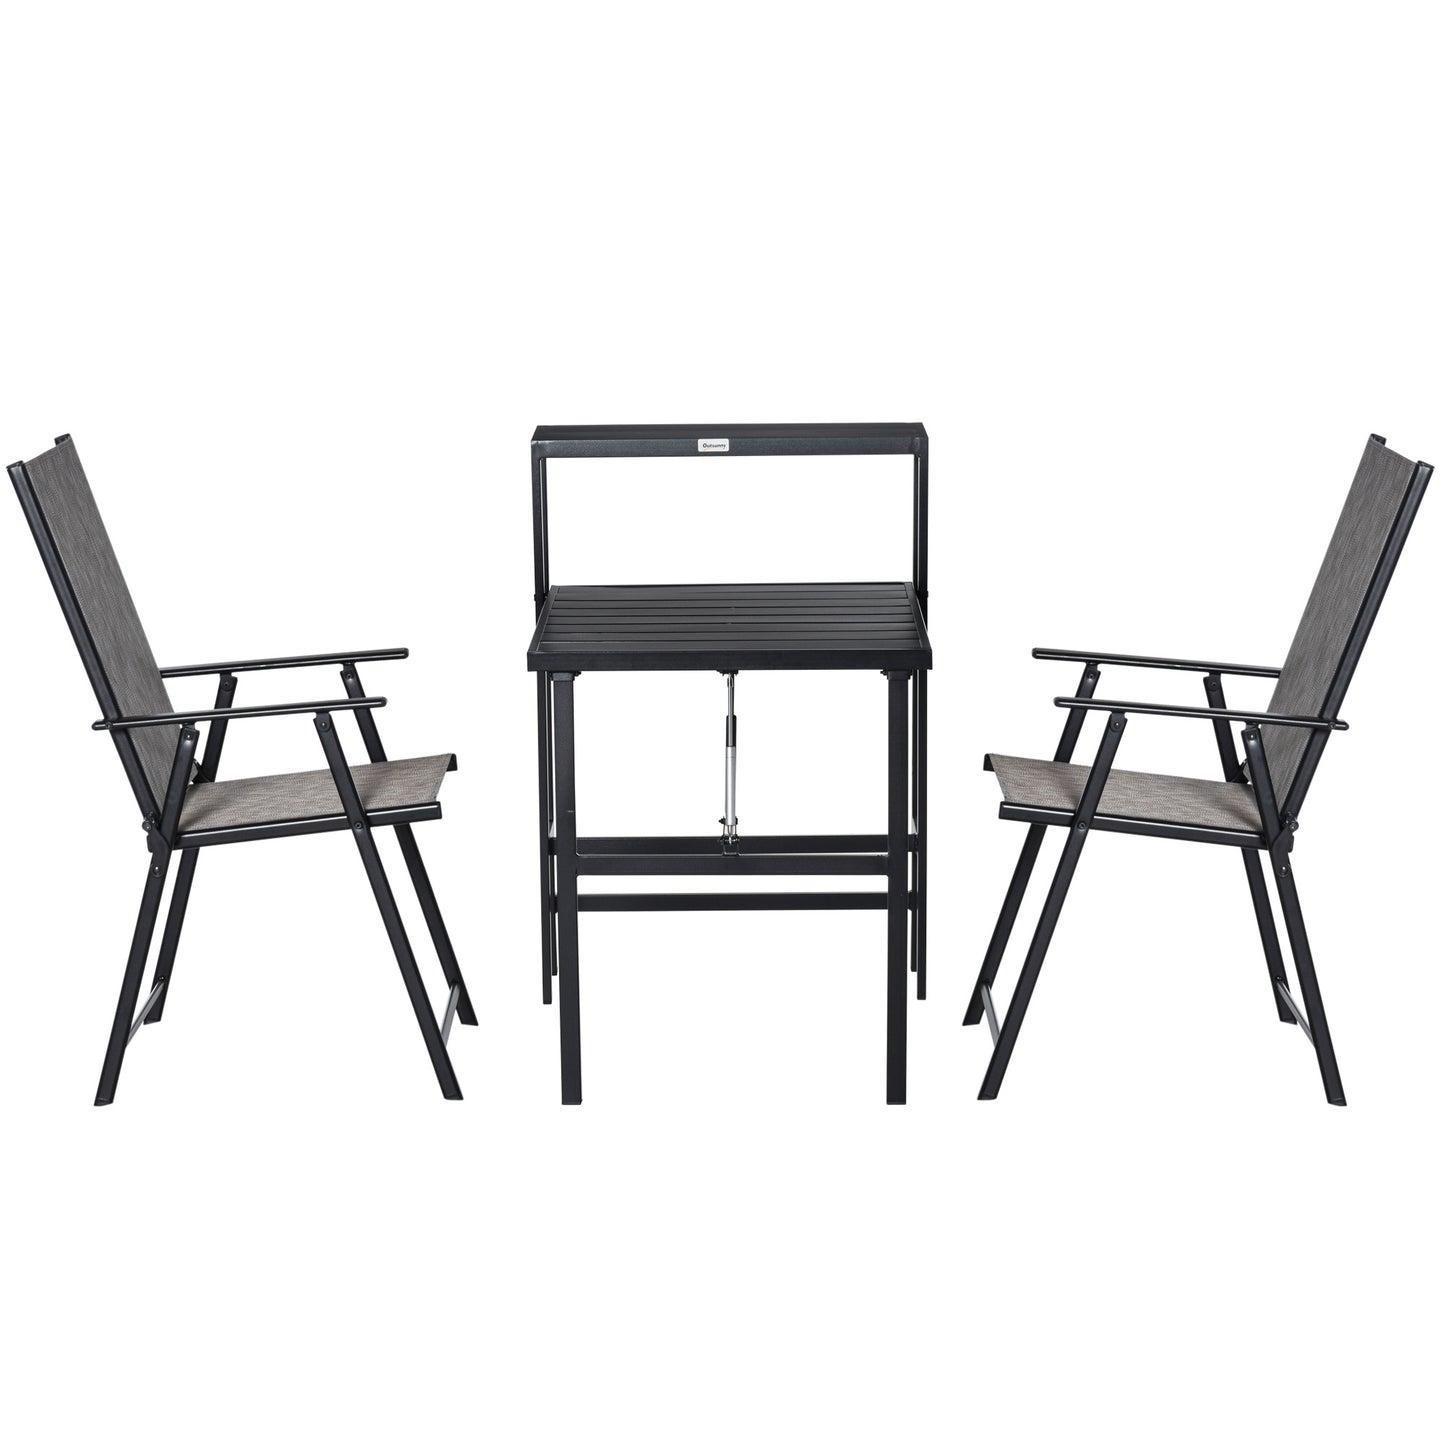 Outsunny 3 Pcs Folding Garden Furniture Set, Portable Table and 2 Chairs Side Shelf